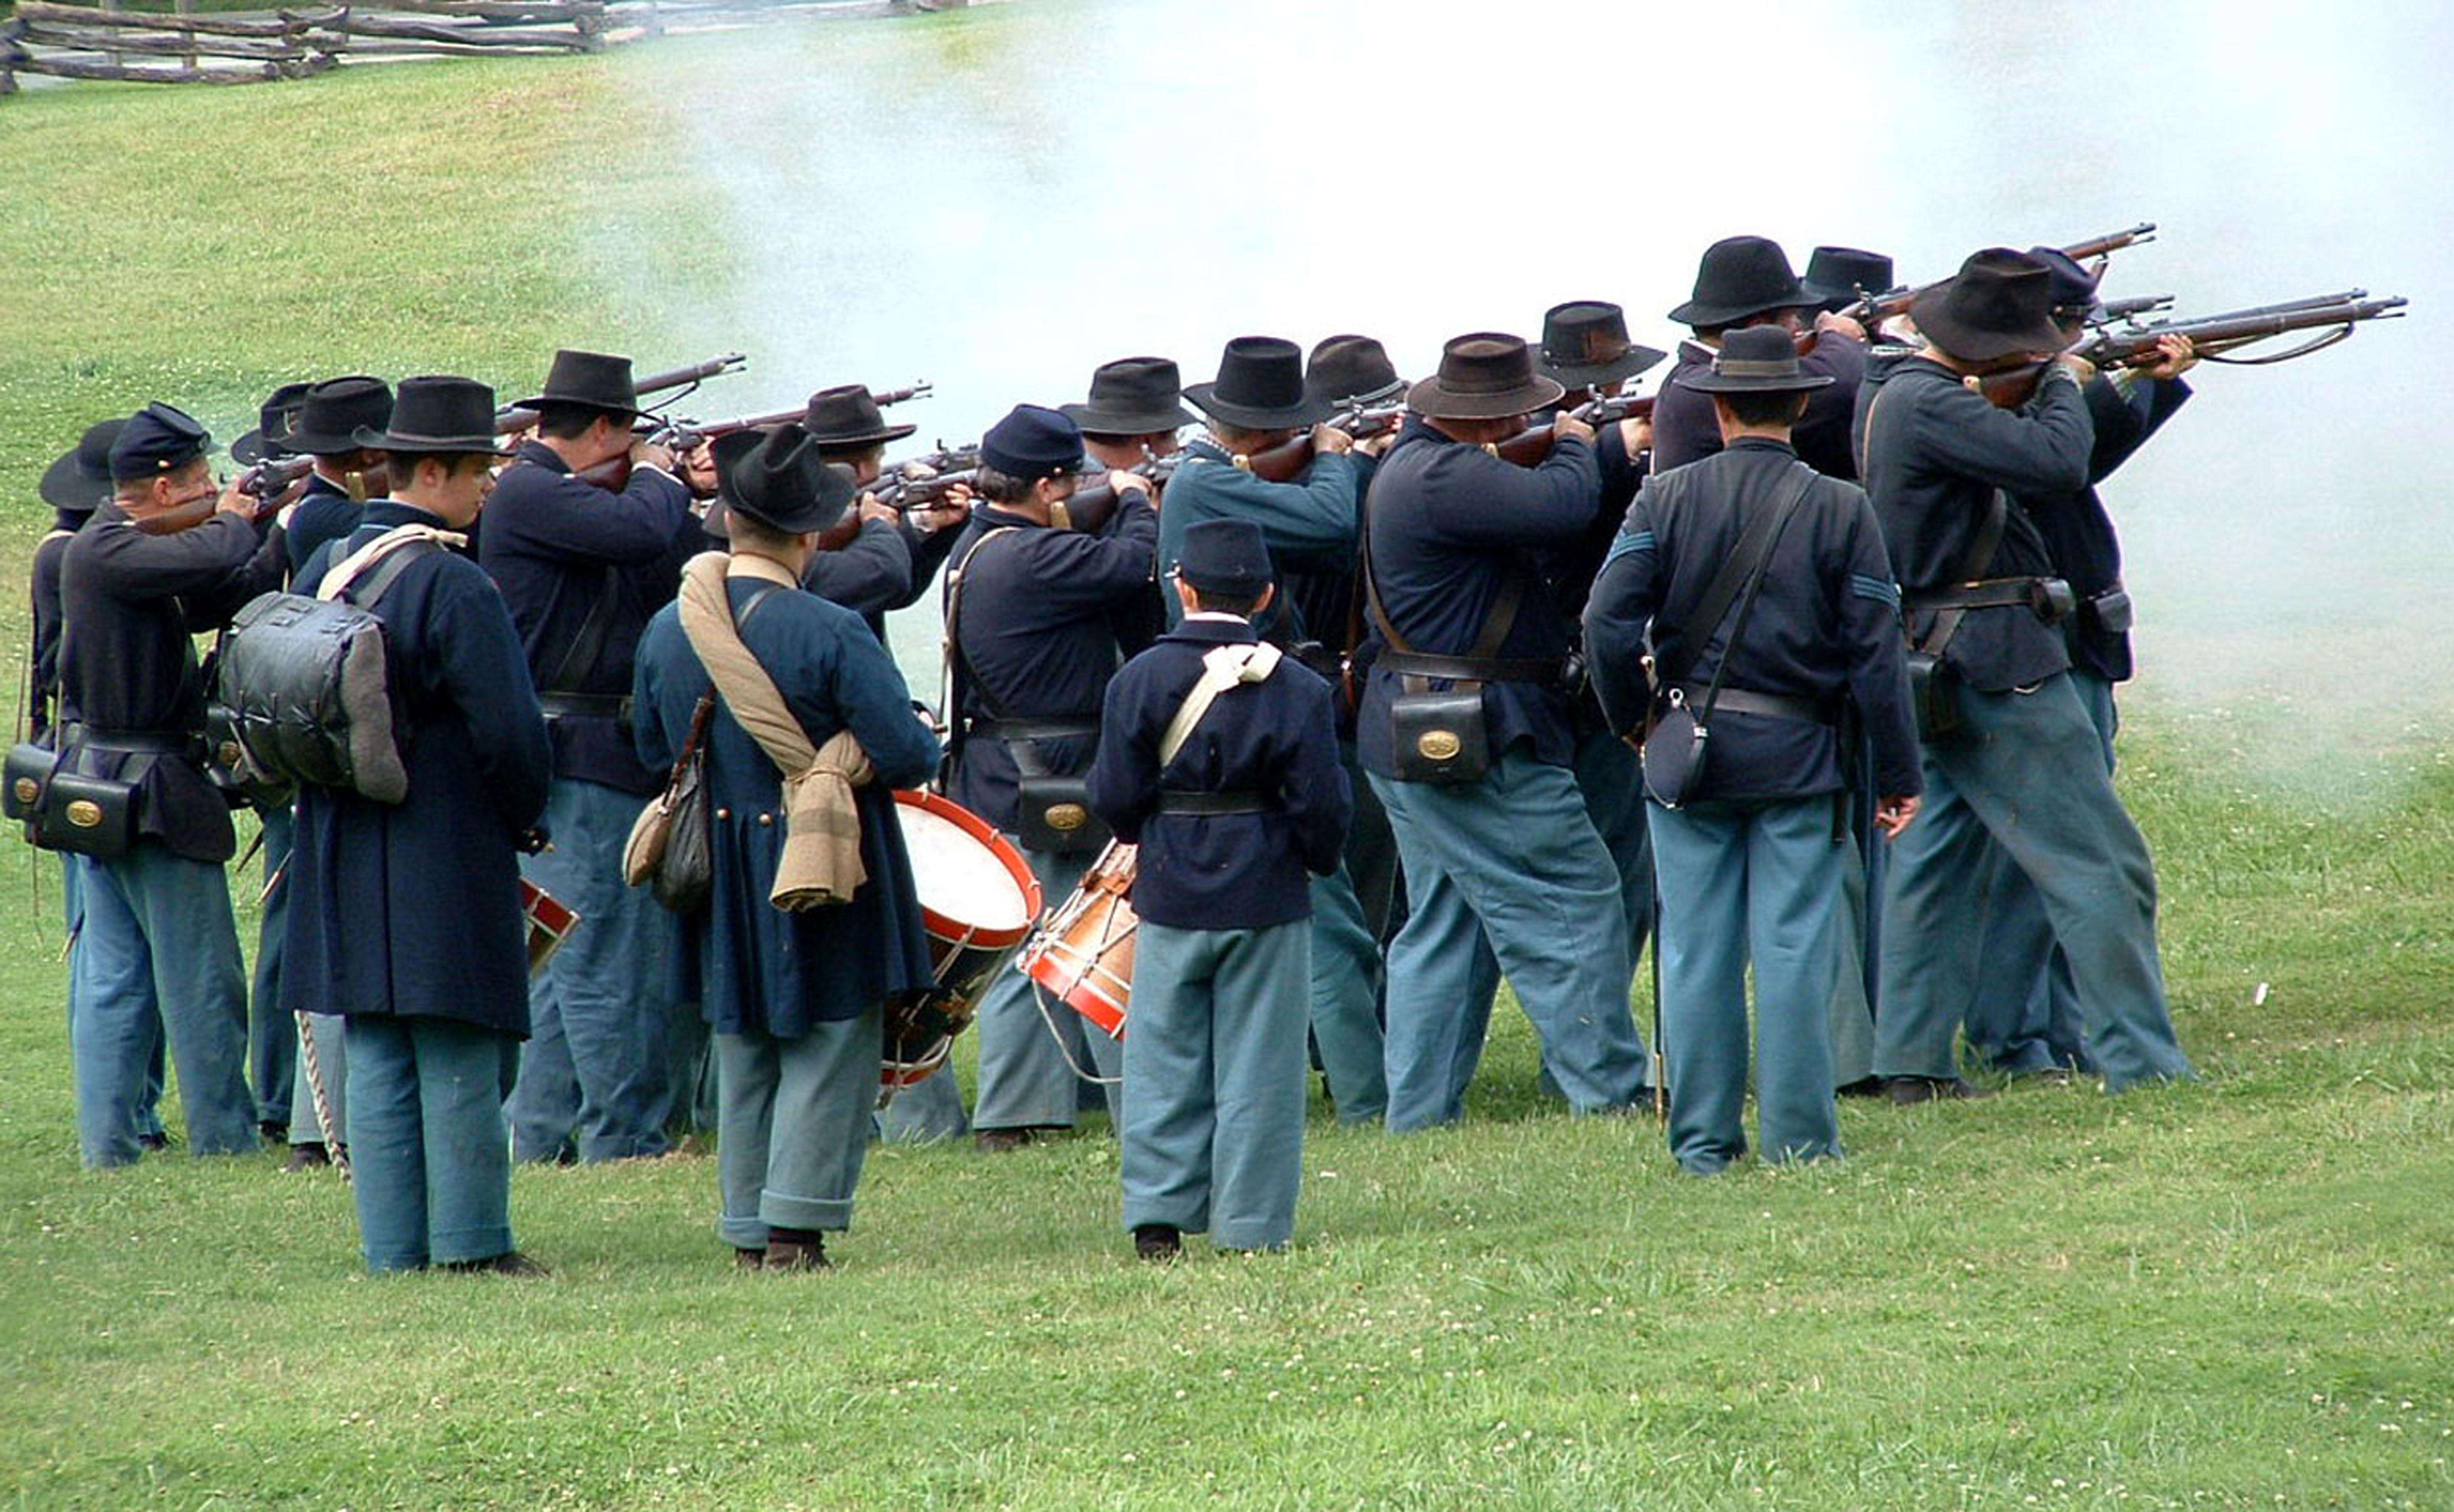 Infantry Demonstration at Kennesaw Mountain.